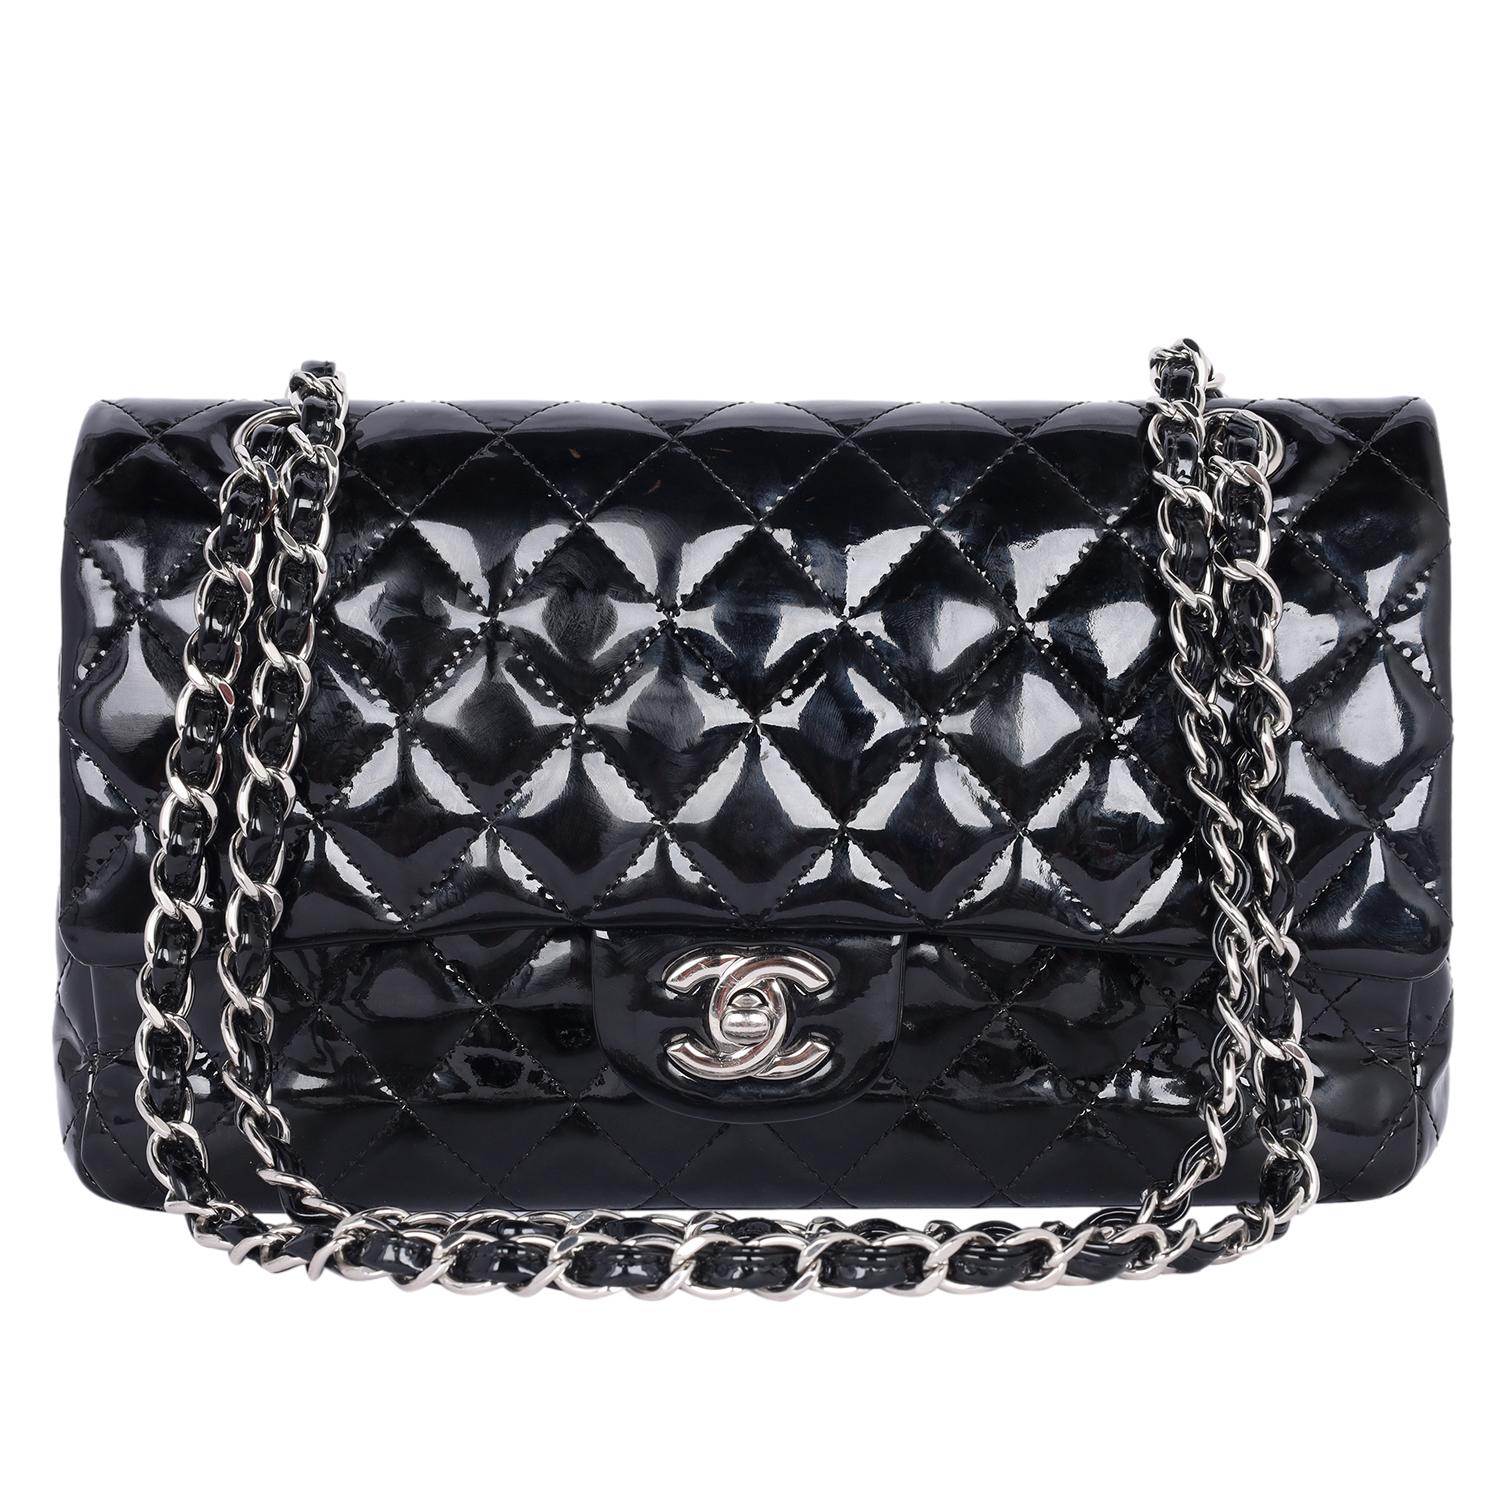 Authentic, pre-loved Chanel black CC double flap bag in patent leather. Features black patent leather, this luxurious, runway-ready bag features a woven-in chain strap, exterior back pocket, silver tone hardware accents. The turn-lock closure opens